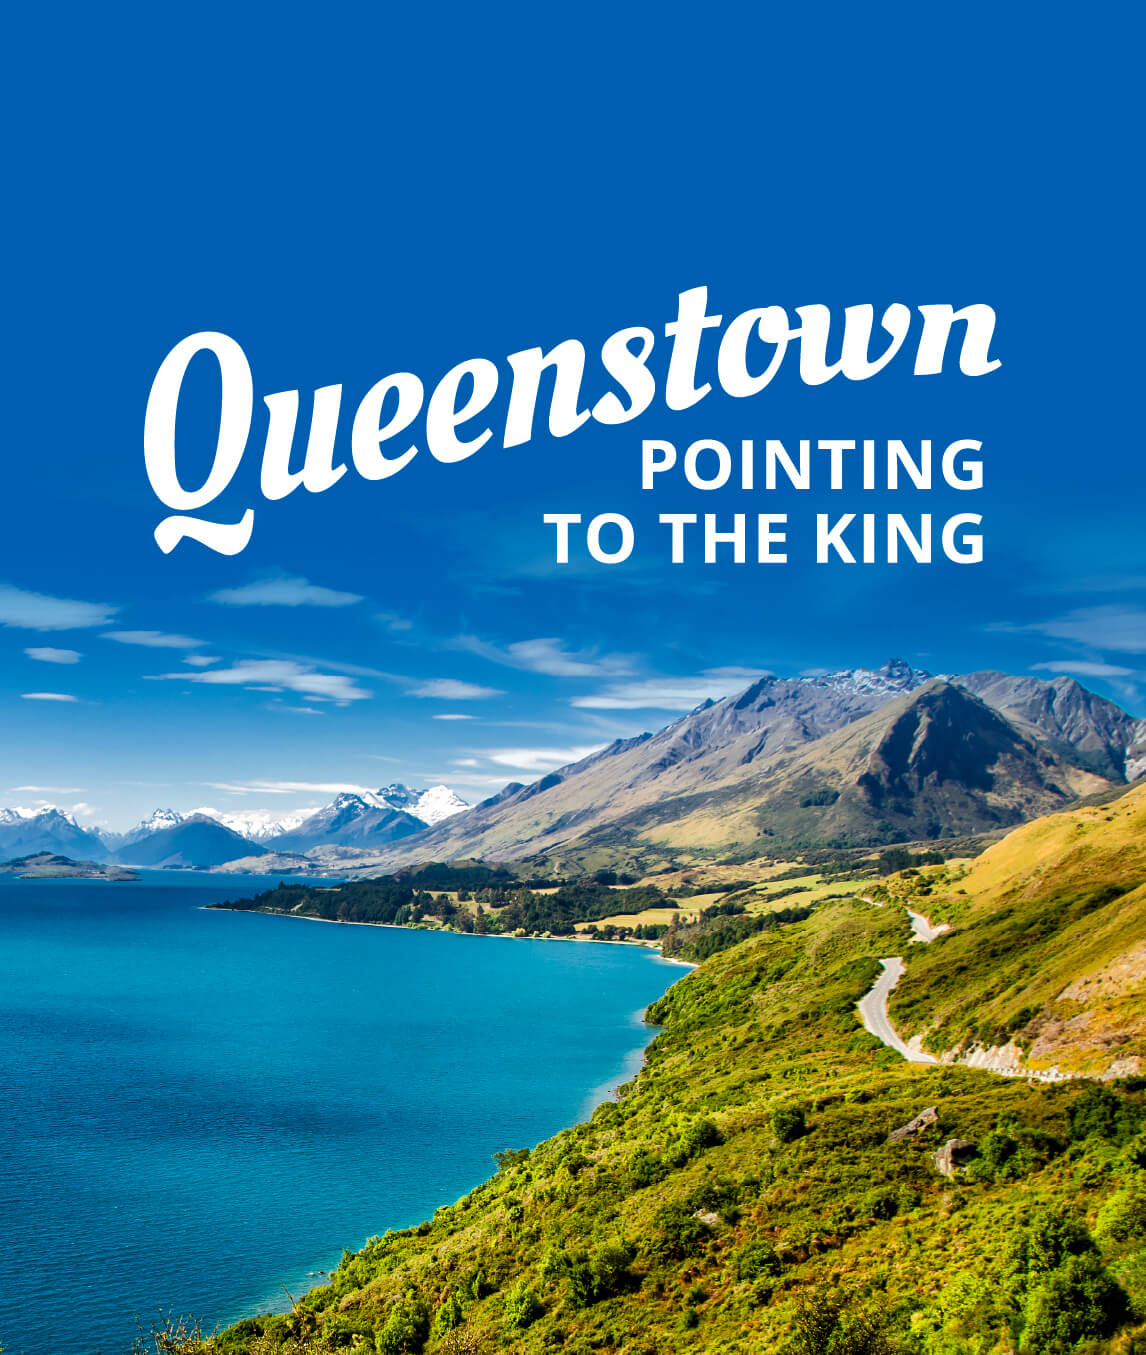 Queenstown: Pointing To The King